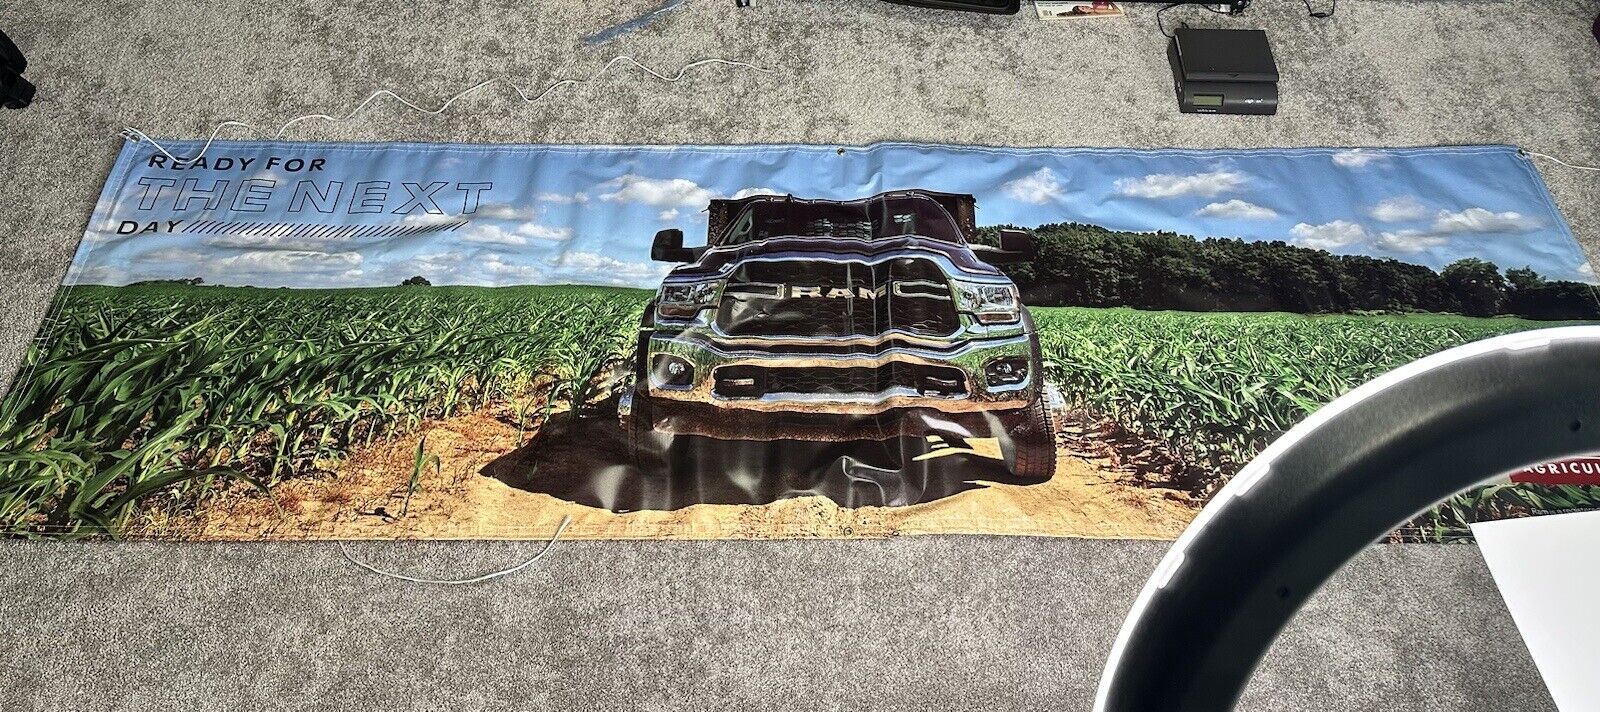 RAM Poster From Dealership Truck of The Month - Ready For The Next Day - 10x3 FT